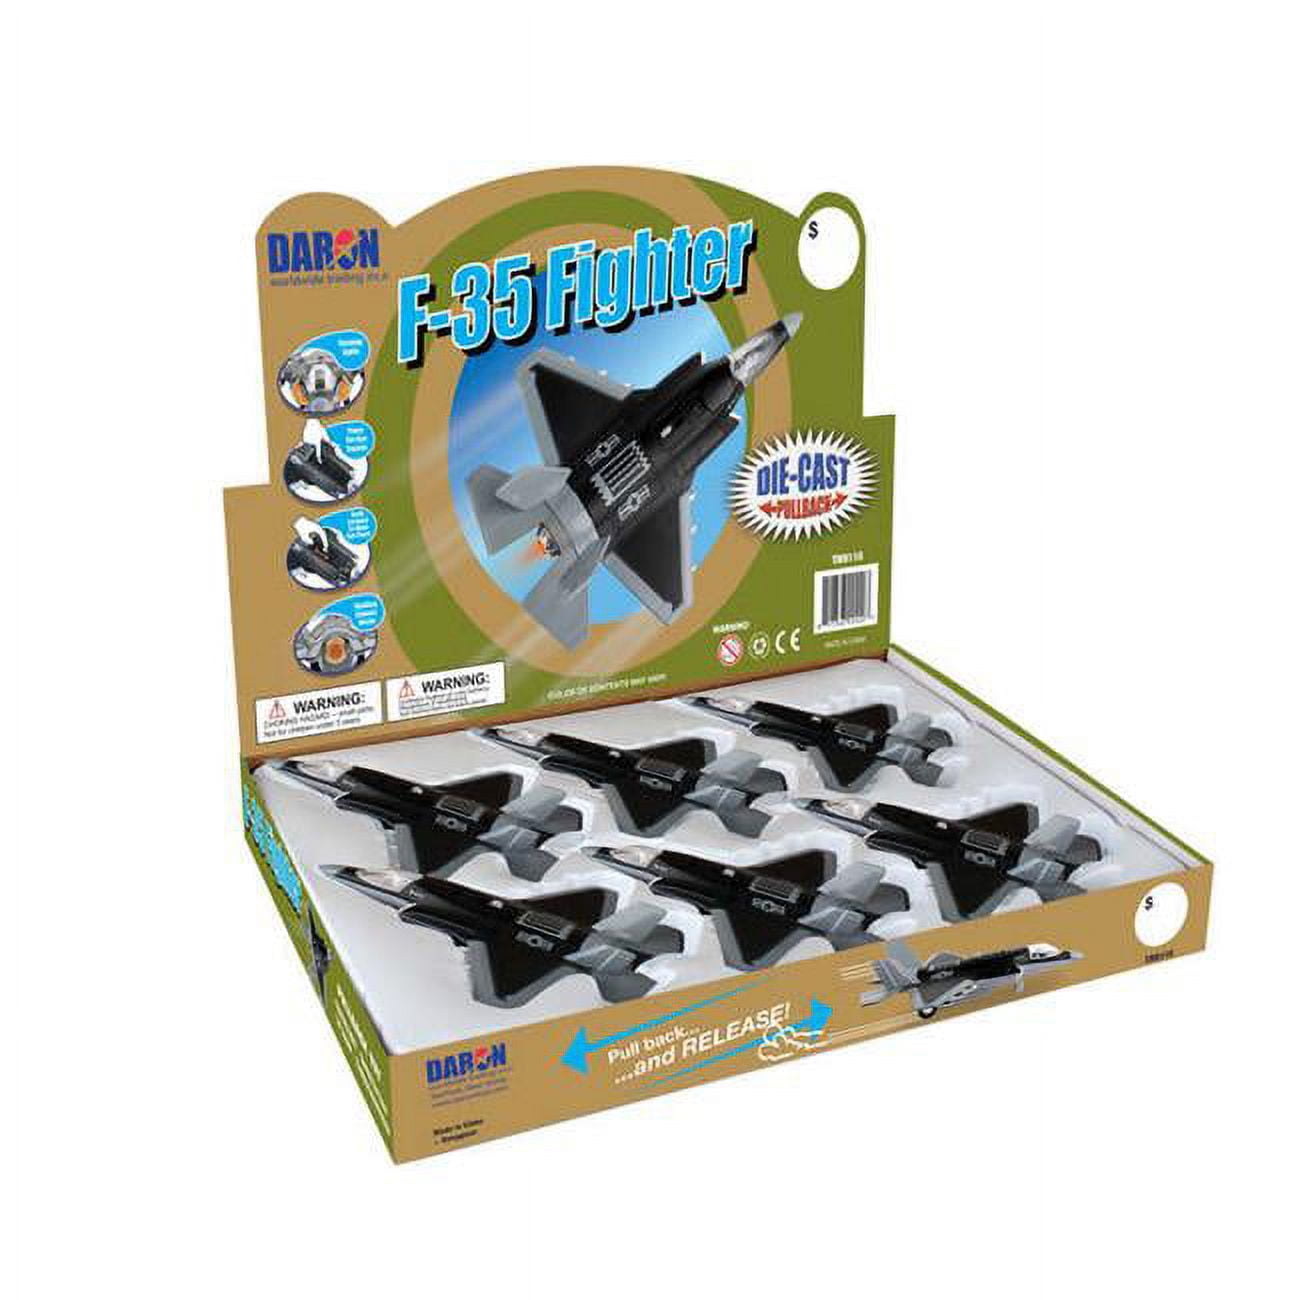 Diecast Pullbacks Tm8110 F-35 Jet Fighter Pullback With Lights & Sound - 6 Piece Counter Display